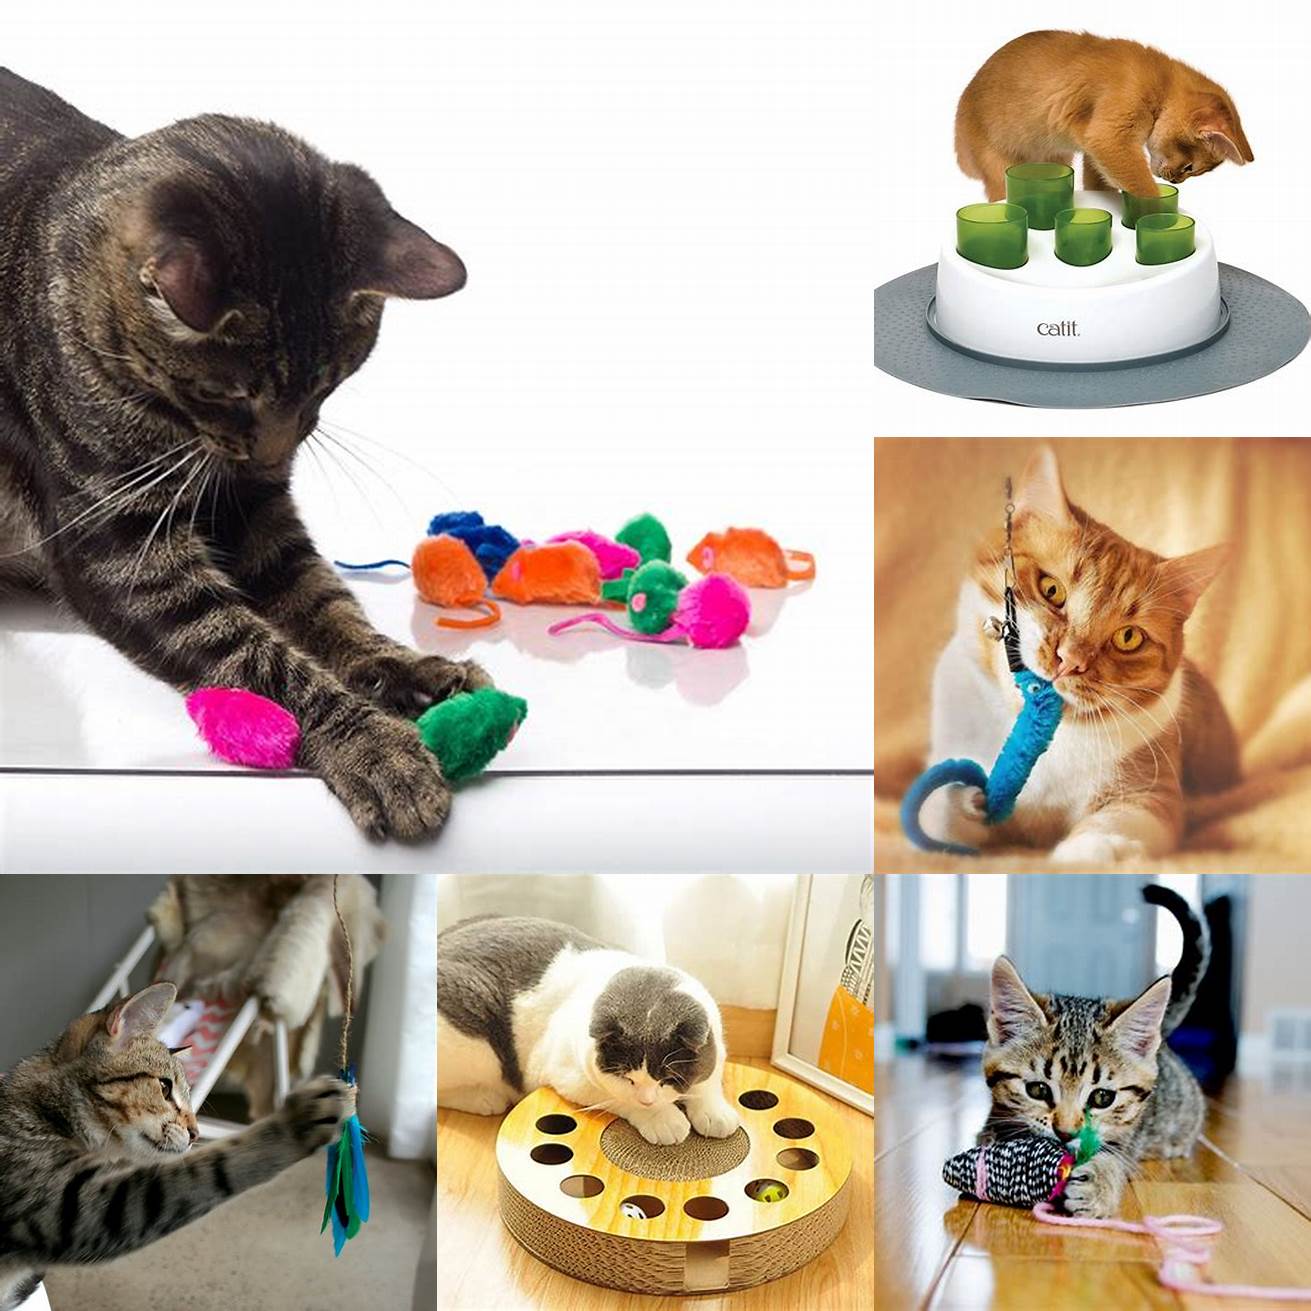 Provide plenty of toys and activities to keep your pet entertained